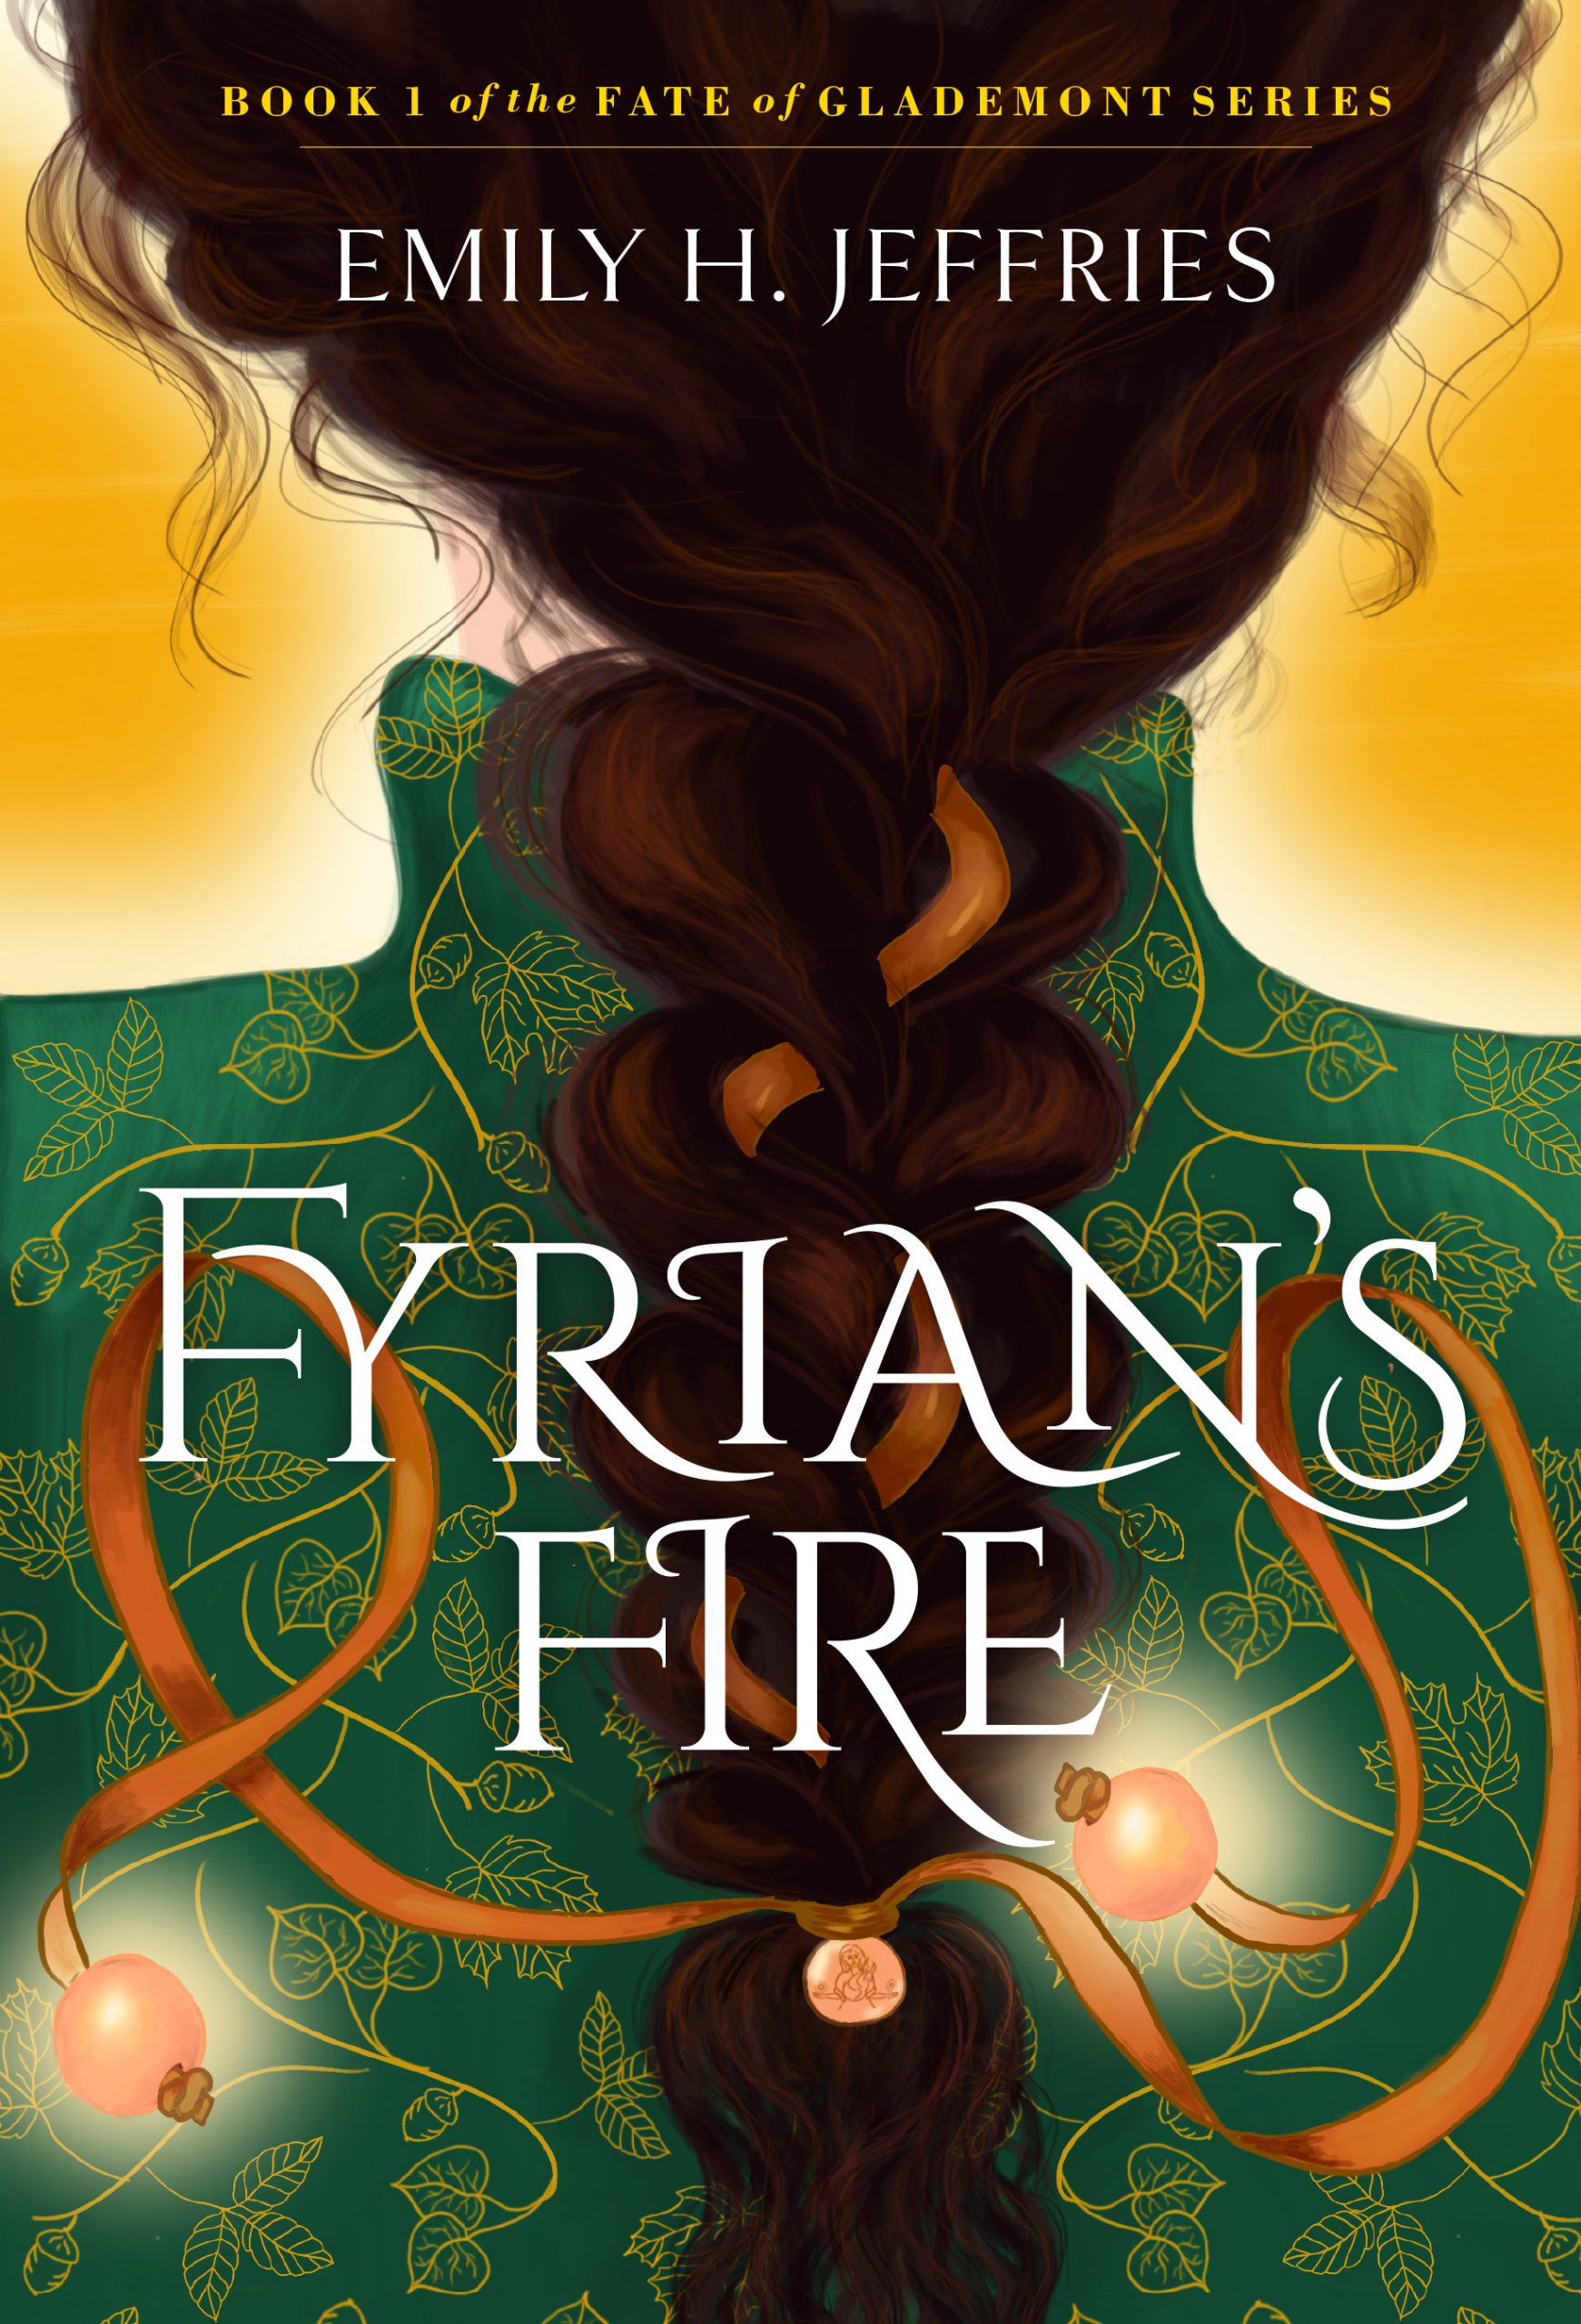 Cover for Emily H. Jeffries book 'Fyrian's Fire'